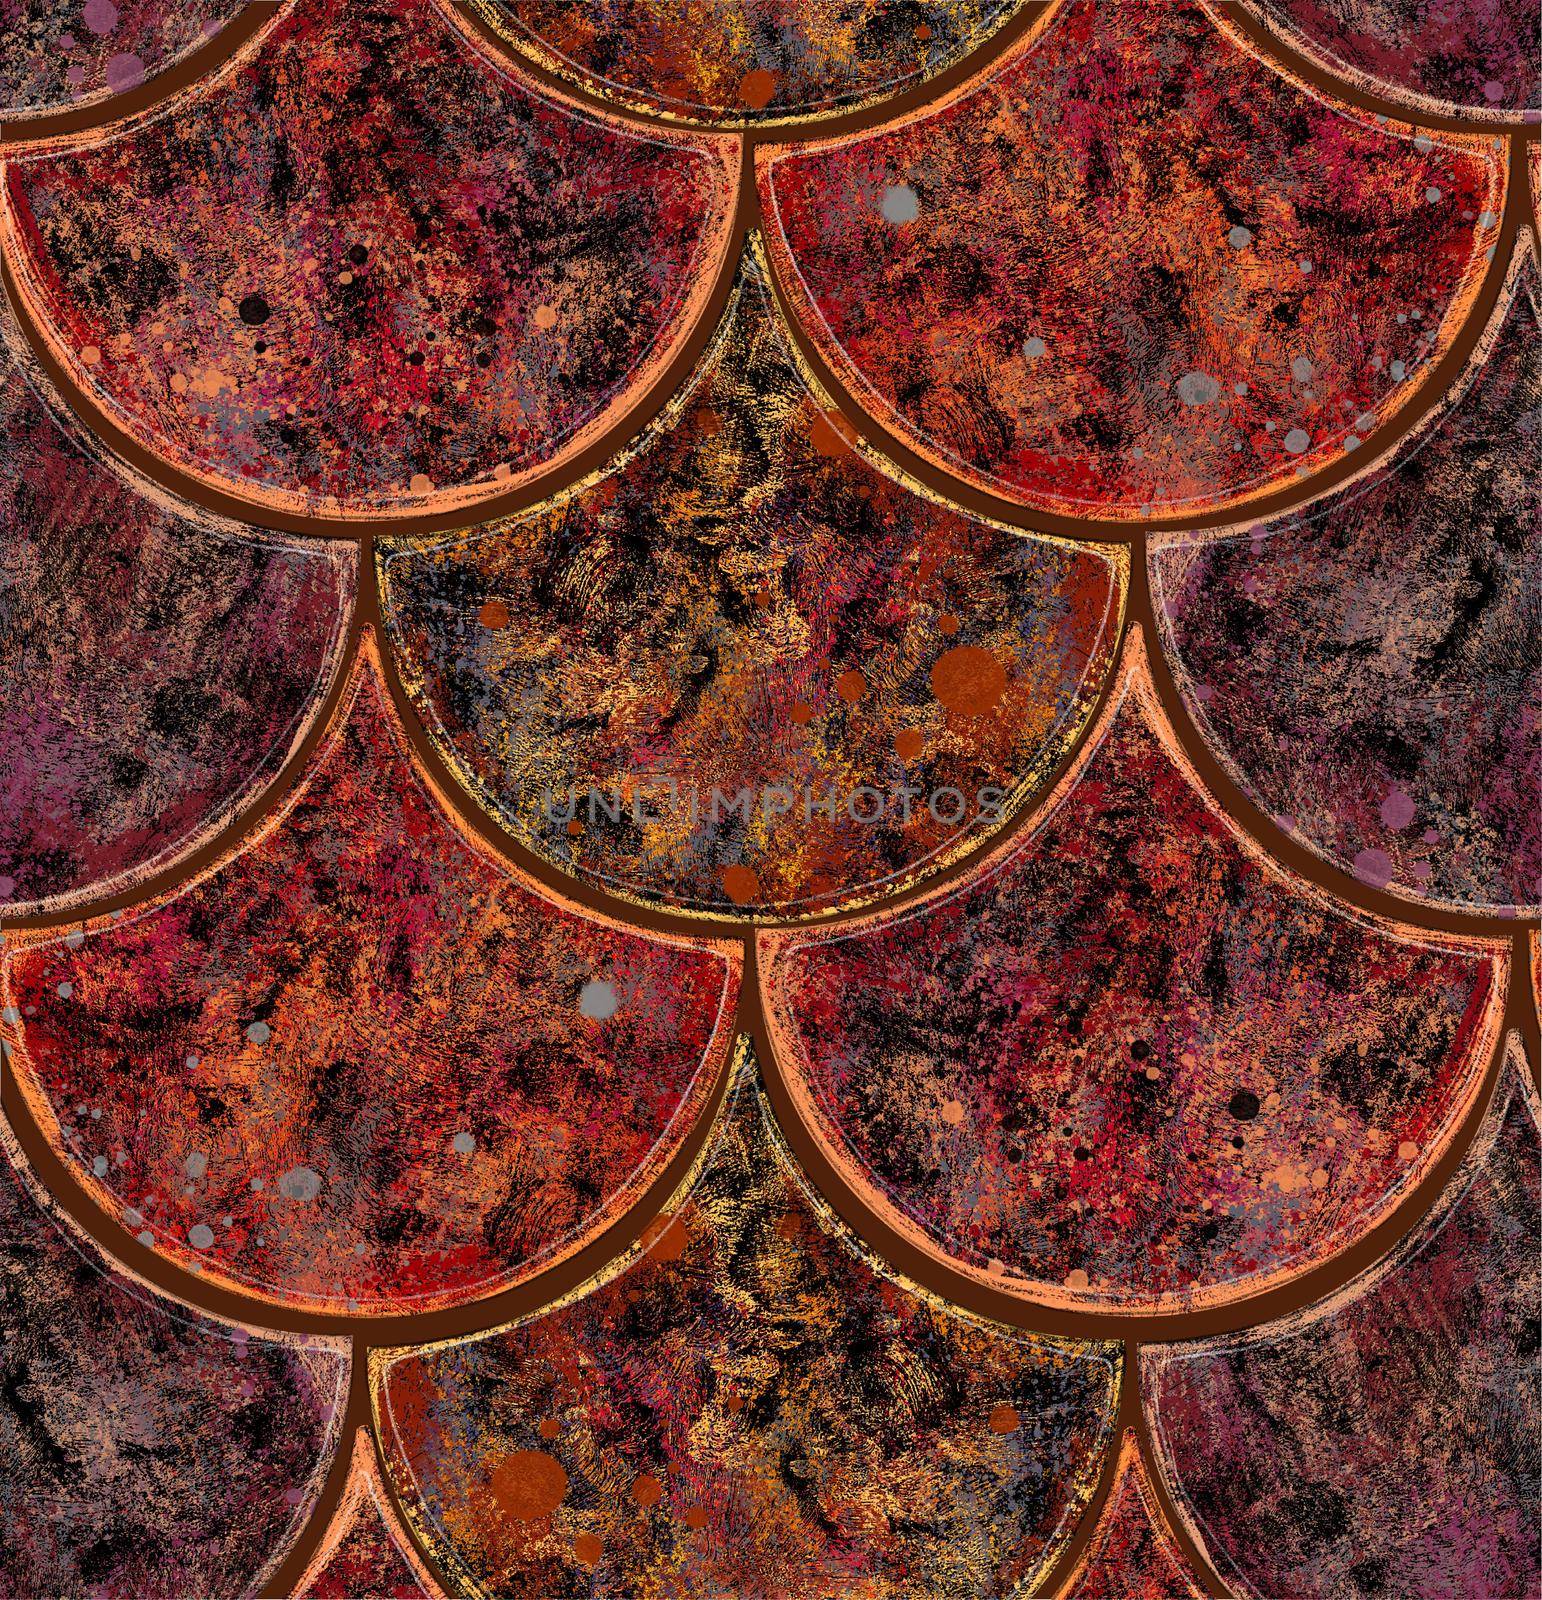 Seamless pattern. Red ceramic tile. Picturesque texture. Fish scale pattern.